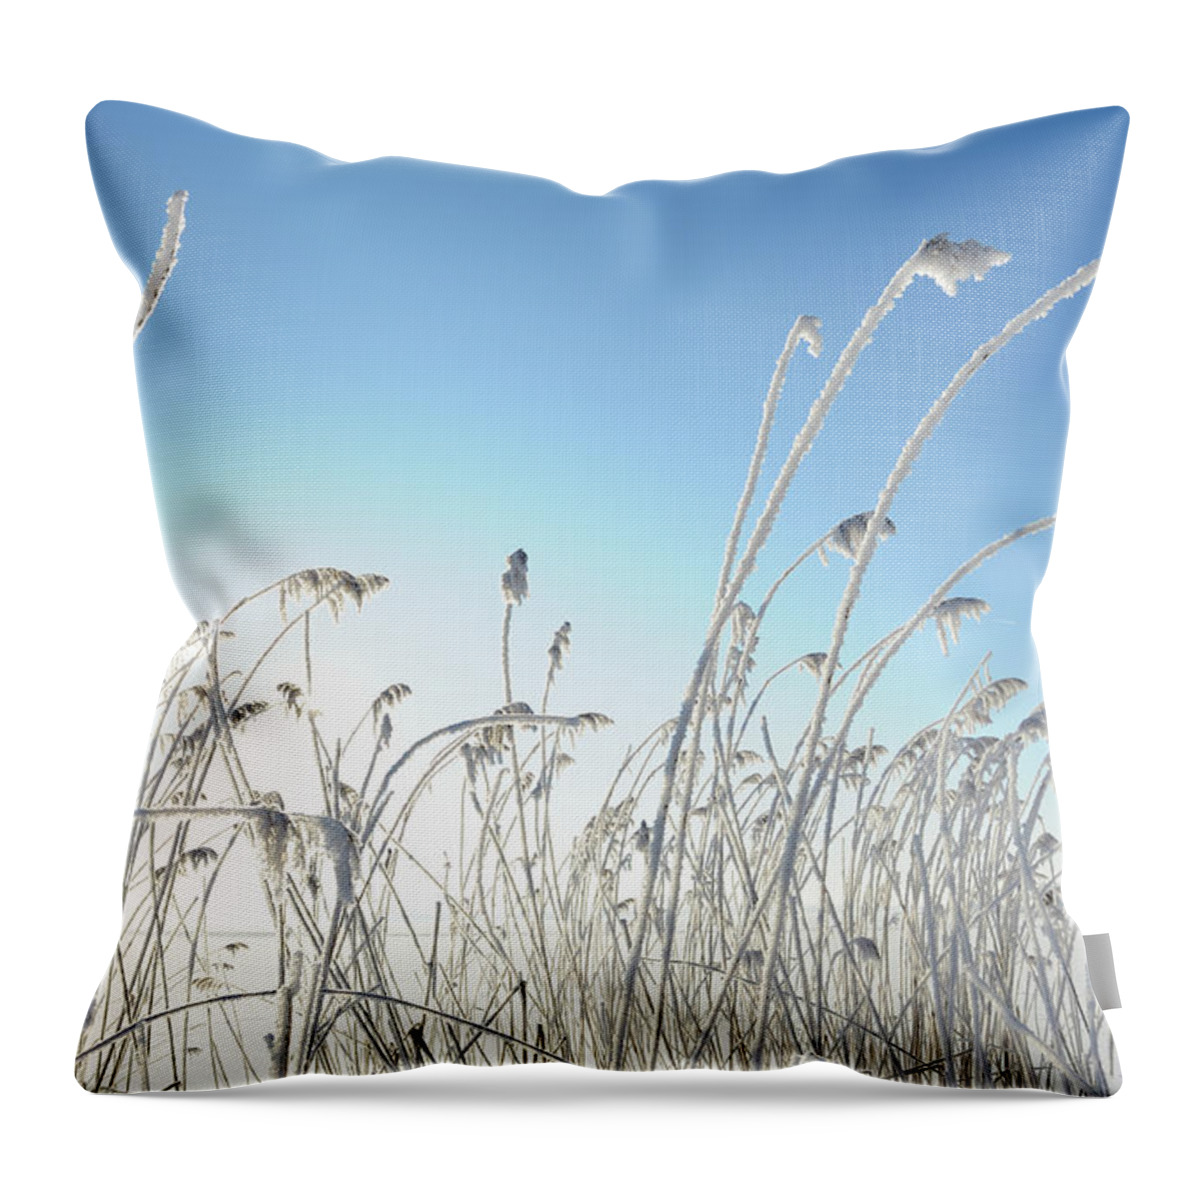 Scenics Throw Pillow featuring the photograph Winter Reeds by Nikitje